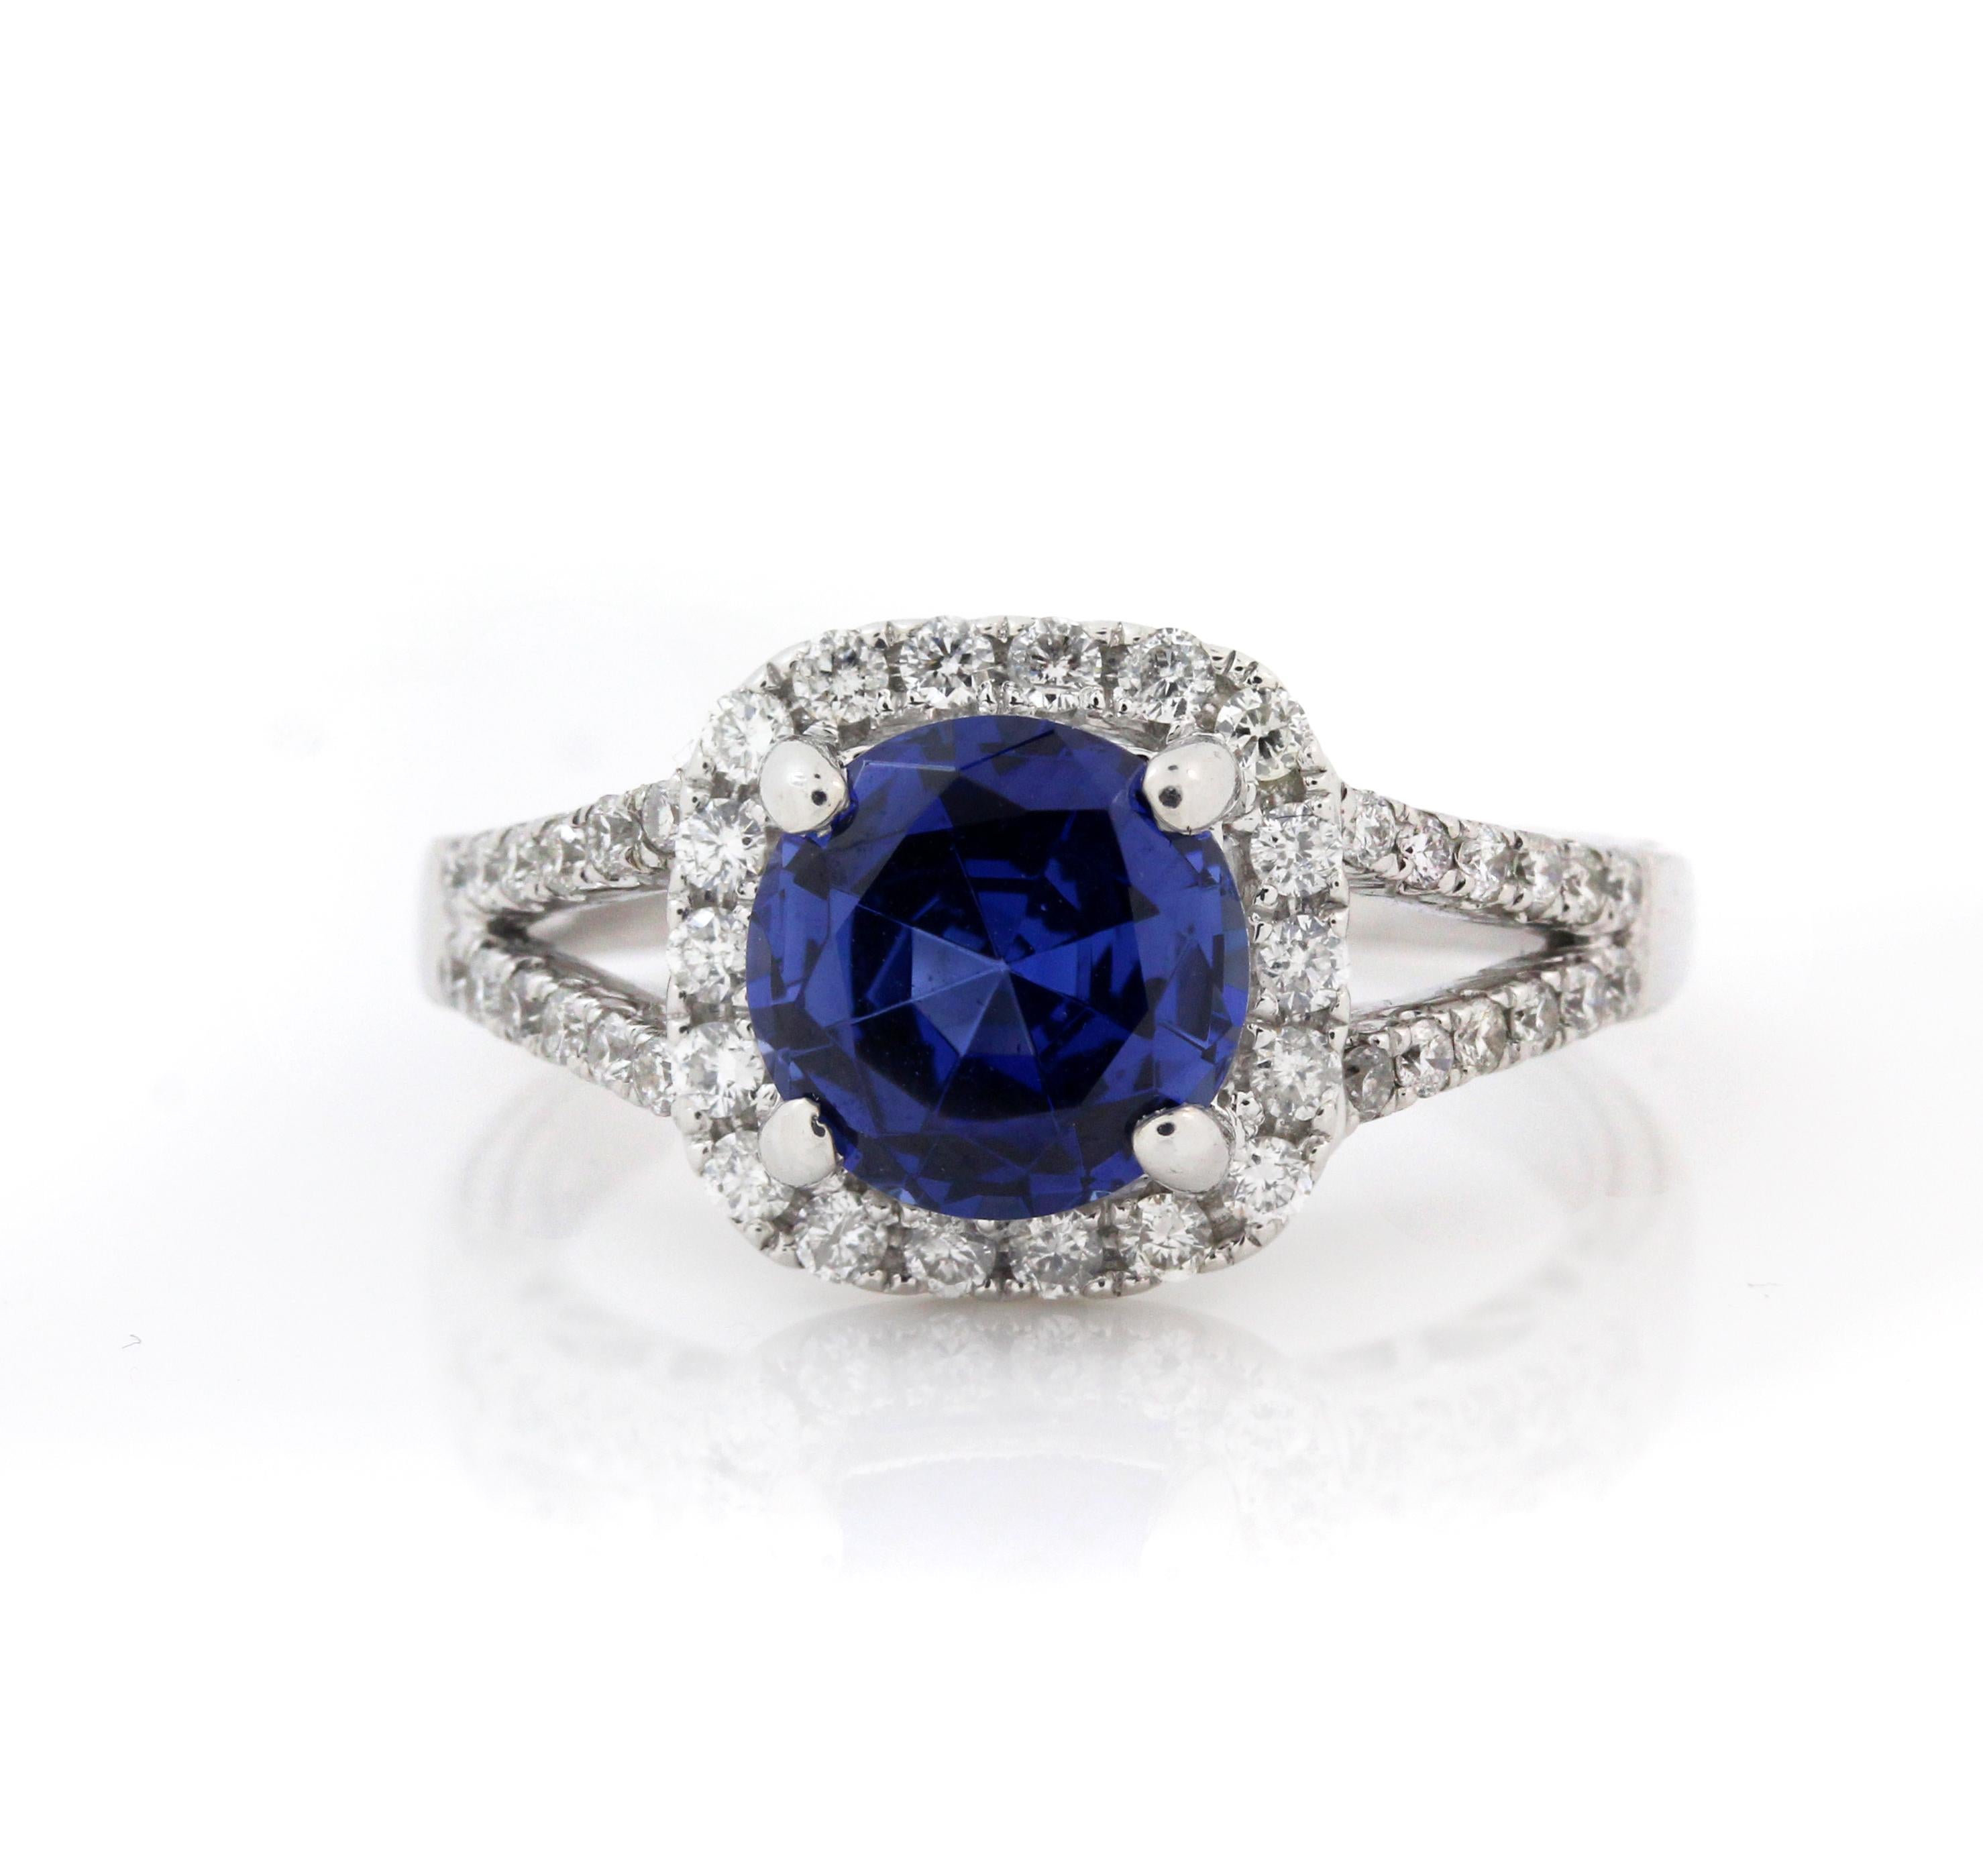 14K White Gold and Diamond Ring with Tanzanite Center

Tanzanite is gorgeous in color. 8mm round apprx. 3.20 carat

0.80 carat diamonds

Size 6. Sizable. 